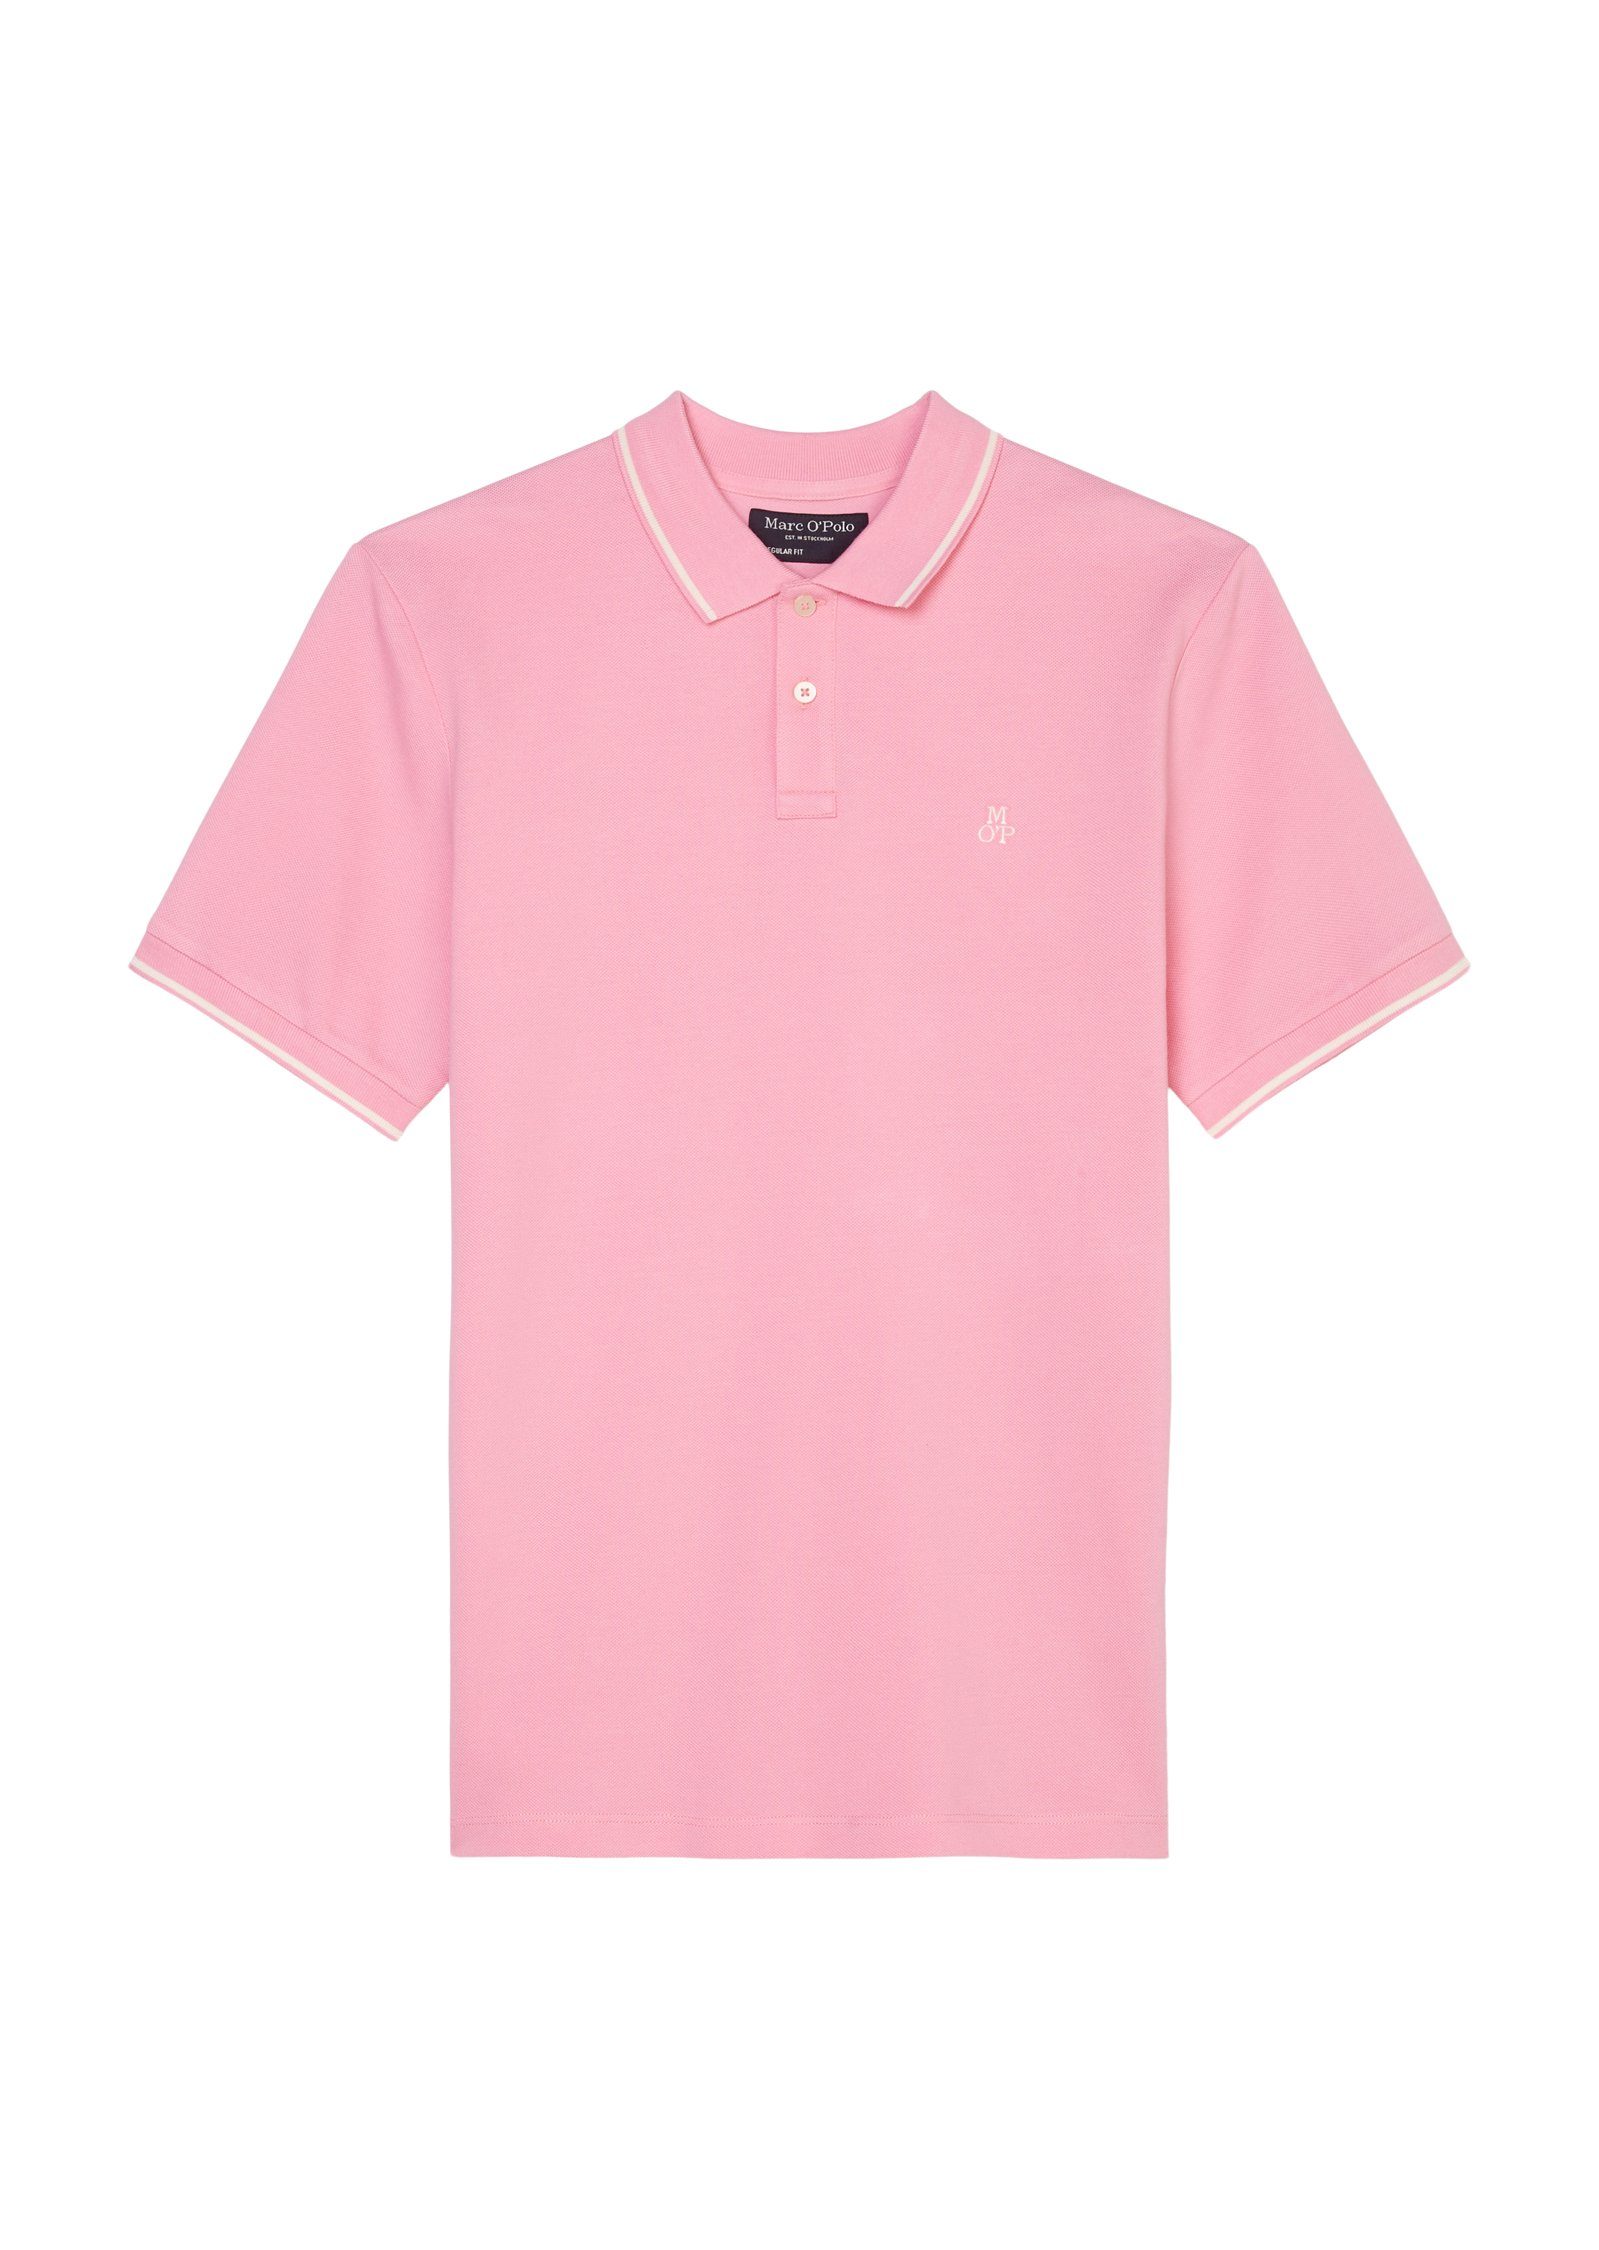 Marc O'Polo Poloshirt short embroidery mit at Logostickerei slits Polo shirt, chest on easter side, pink sleeve